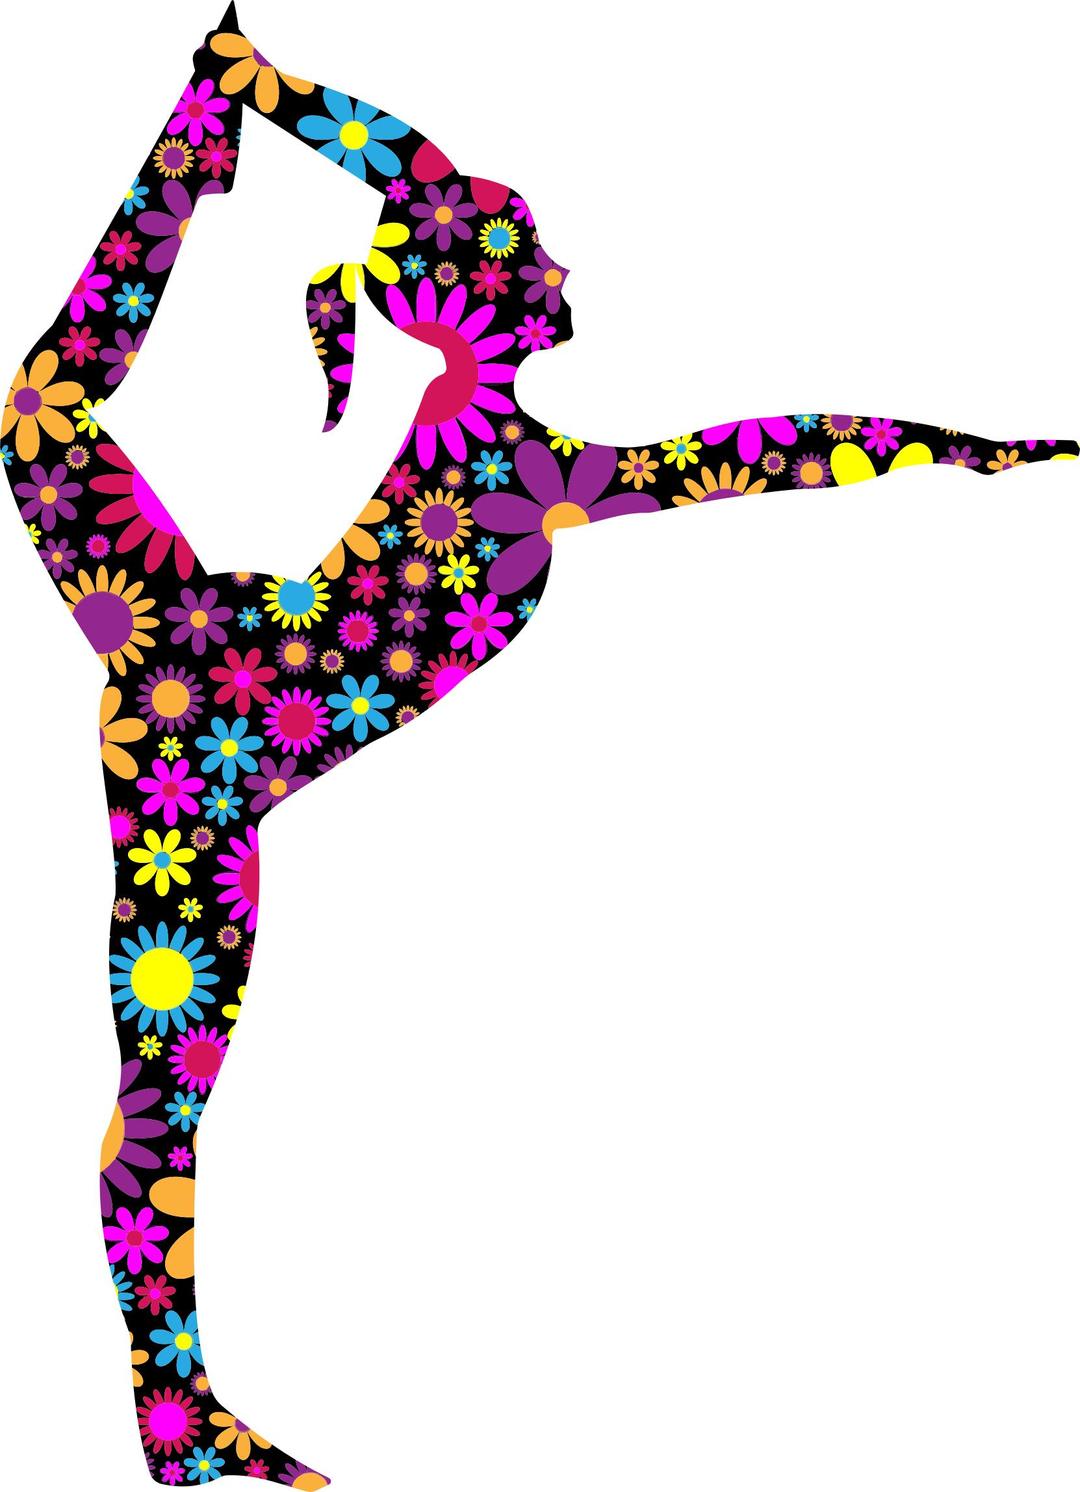 Floral Stretching Ballerina Silhouette png transparent